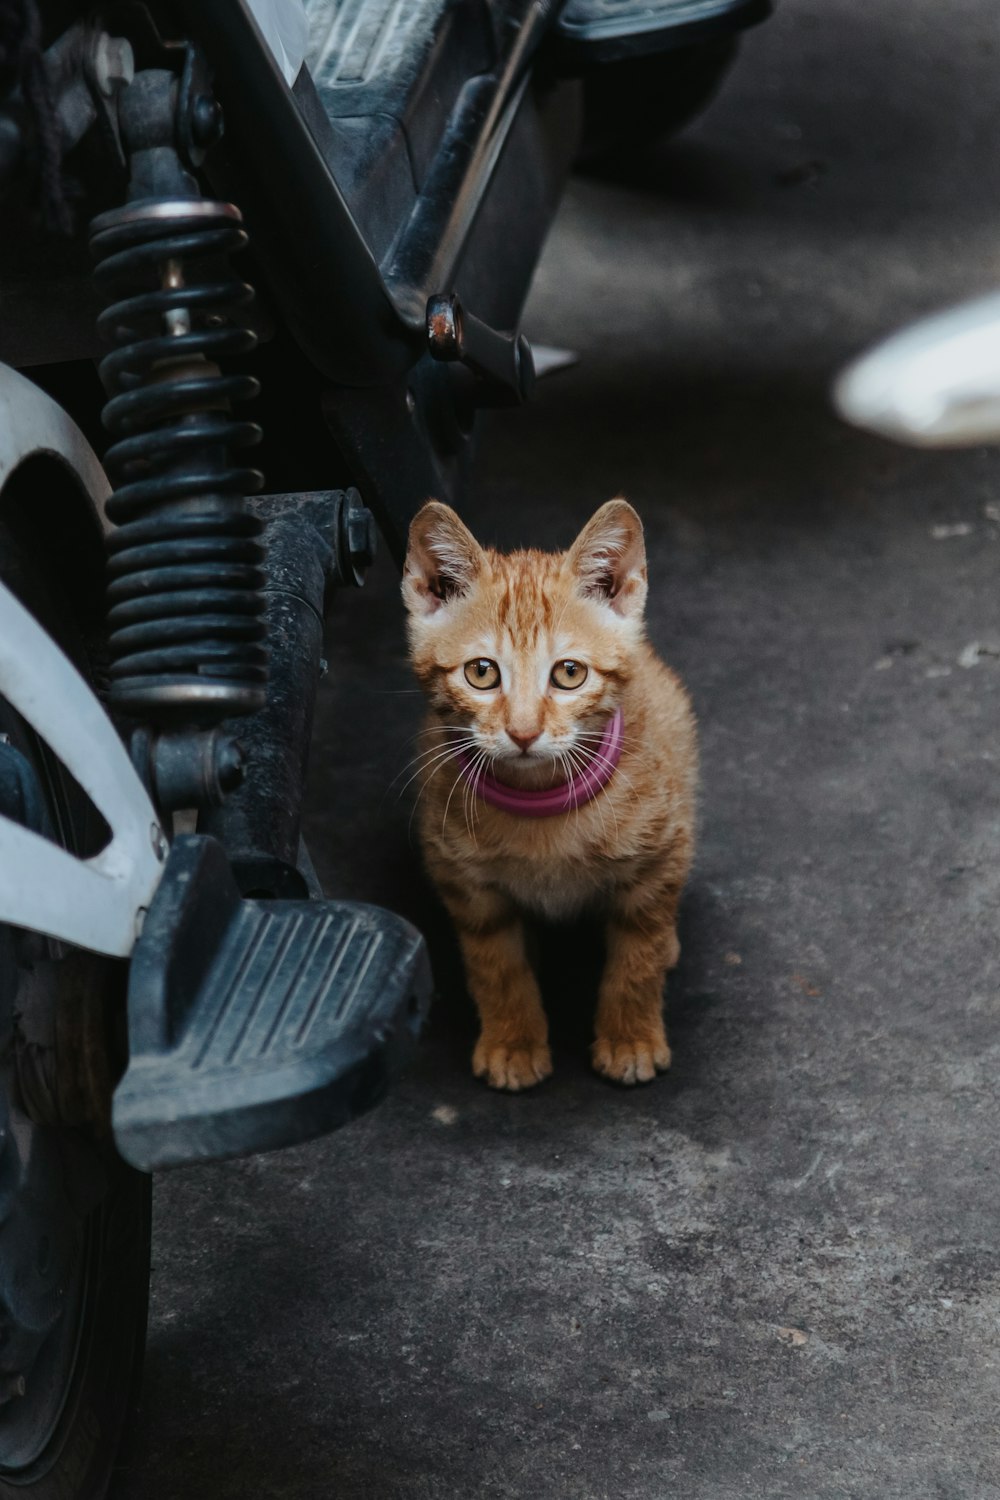 a small orange kitten standing next to a motorcycle